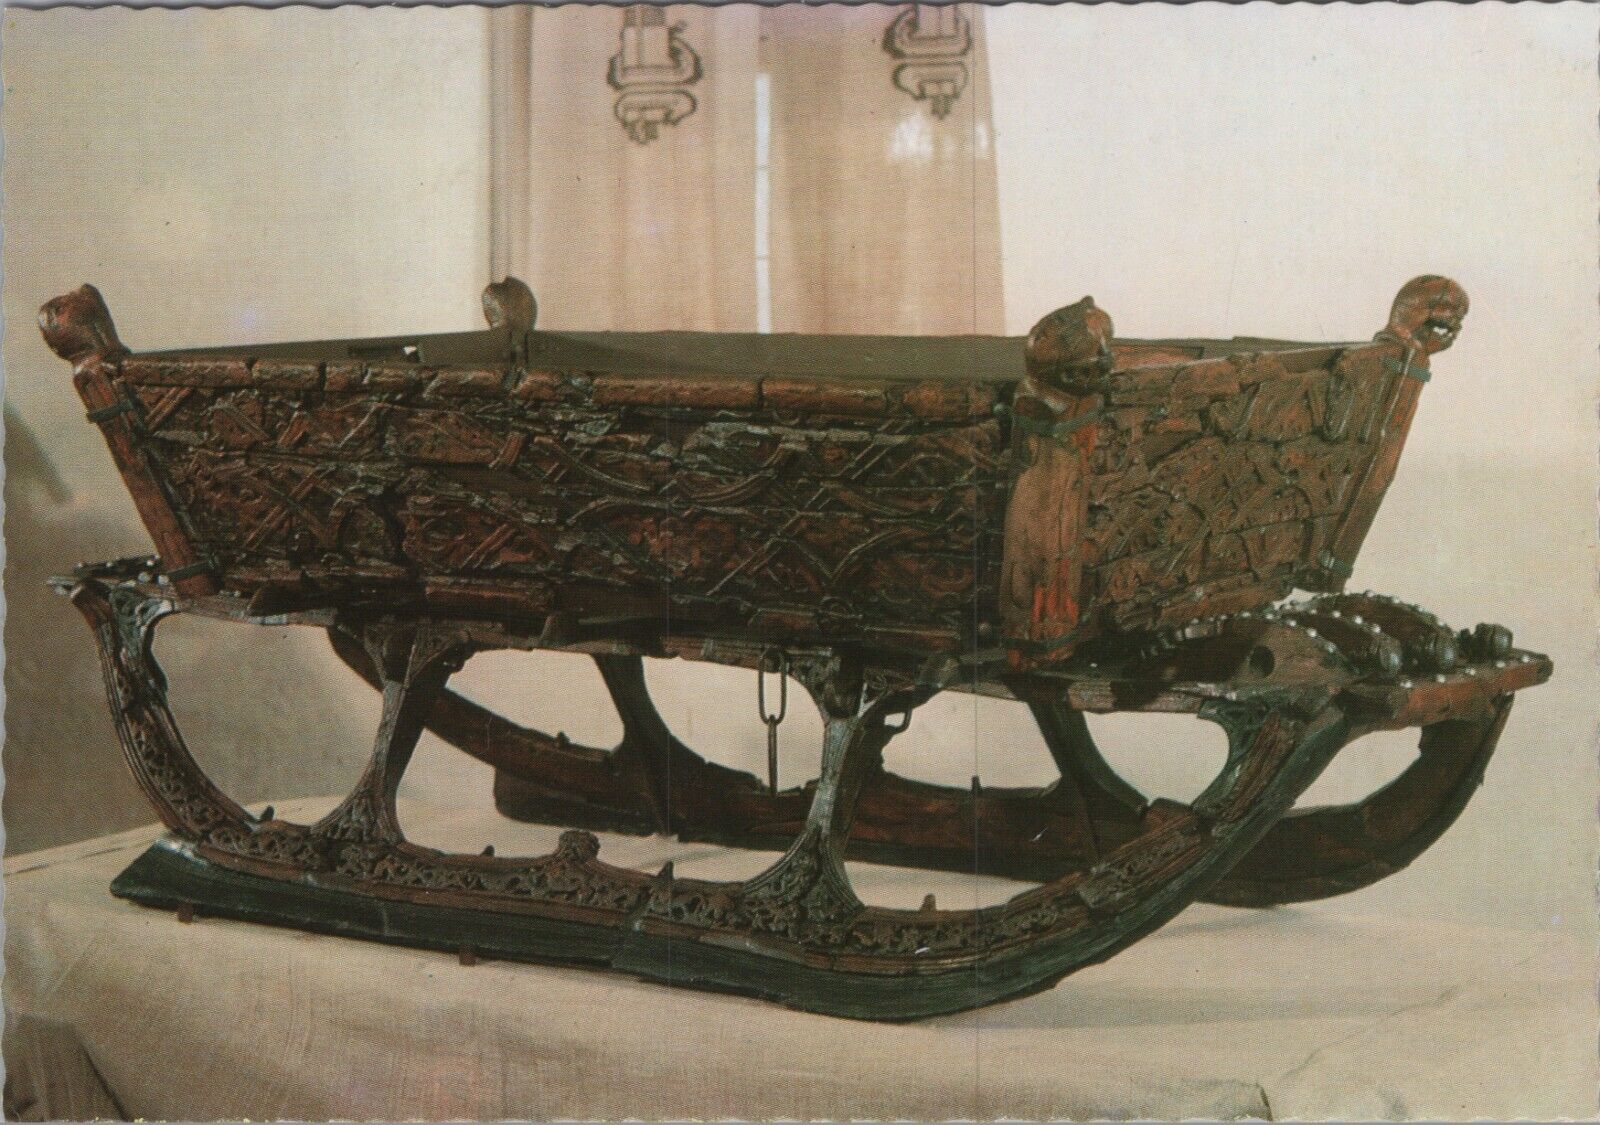 A Carved Sleigh from Oseberg, Norway UNP Vintage Postcard 6178c4 MR ALE